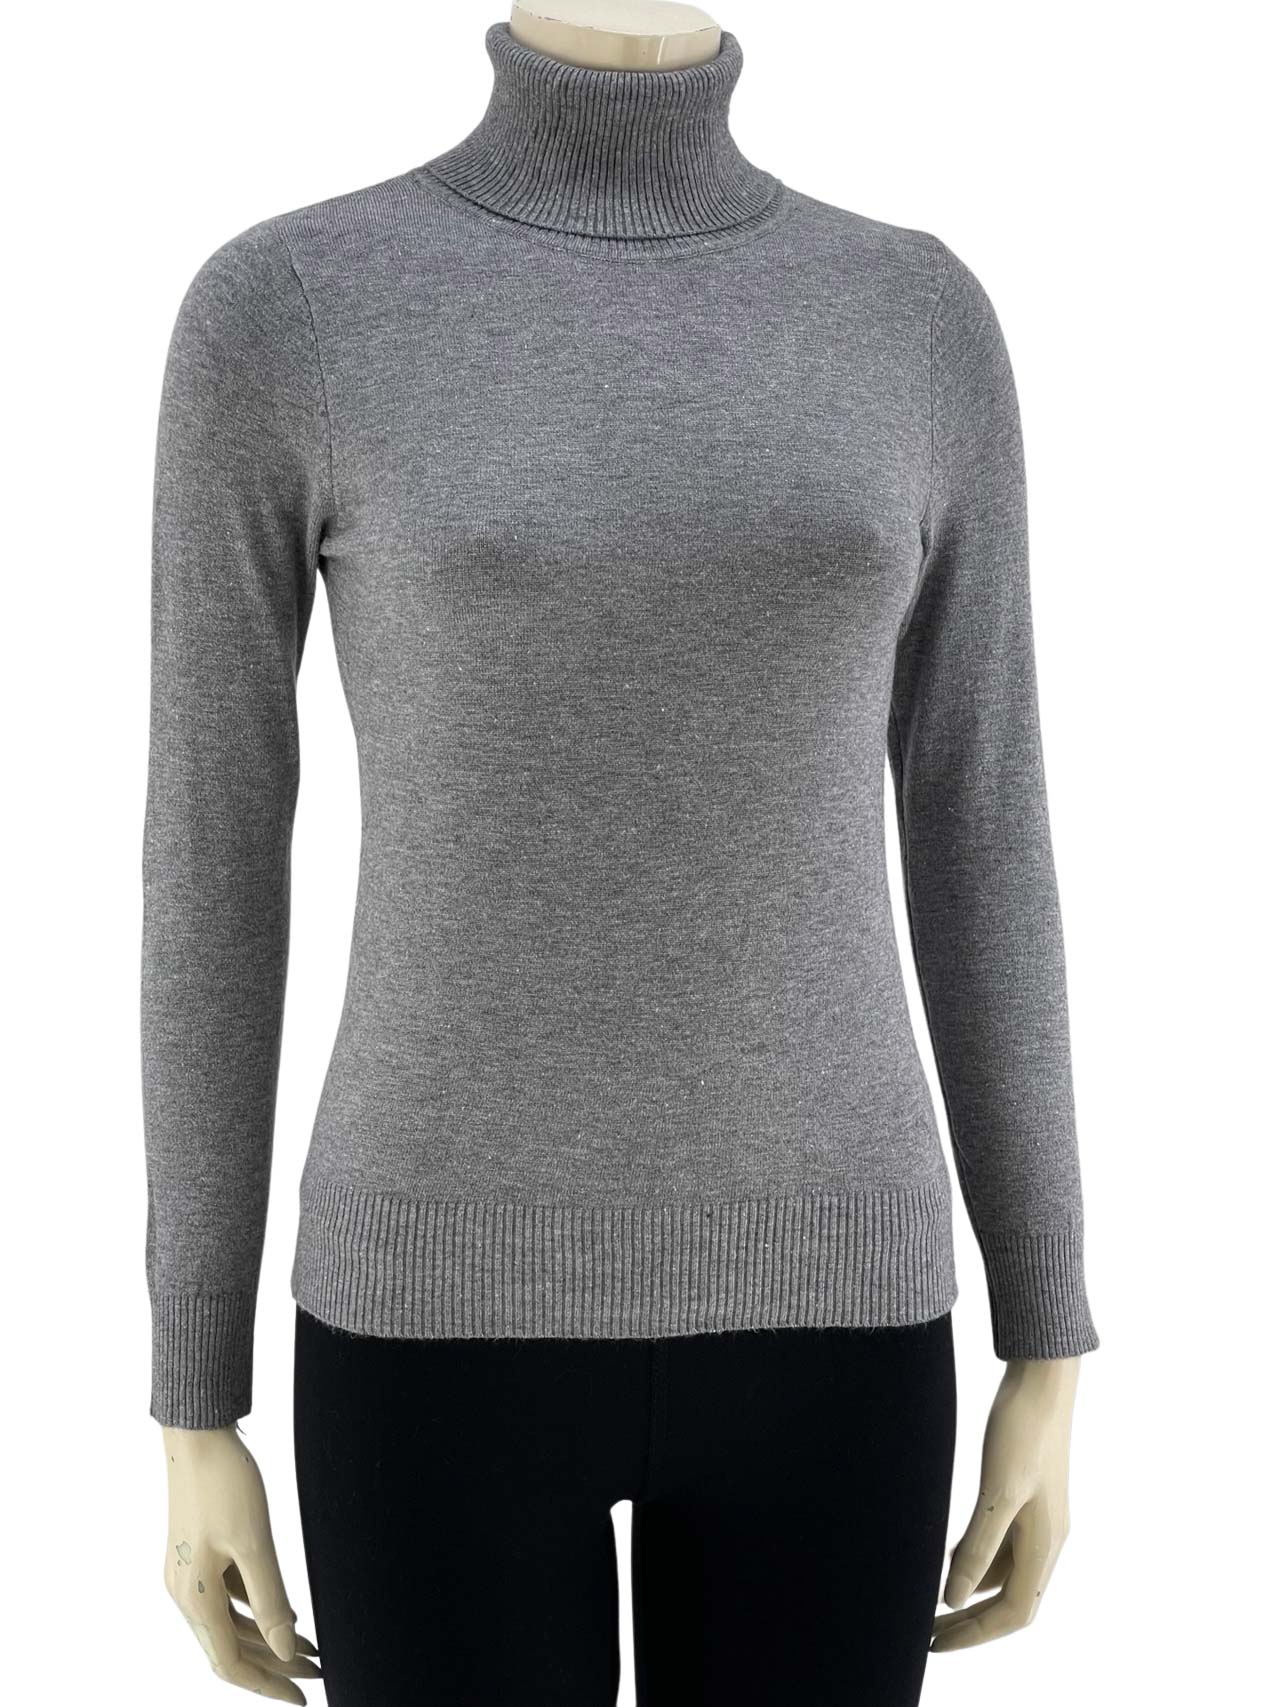 Women's knitted blouse with turn neck code 8875